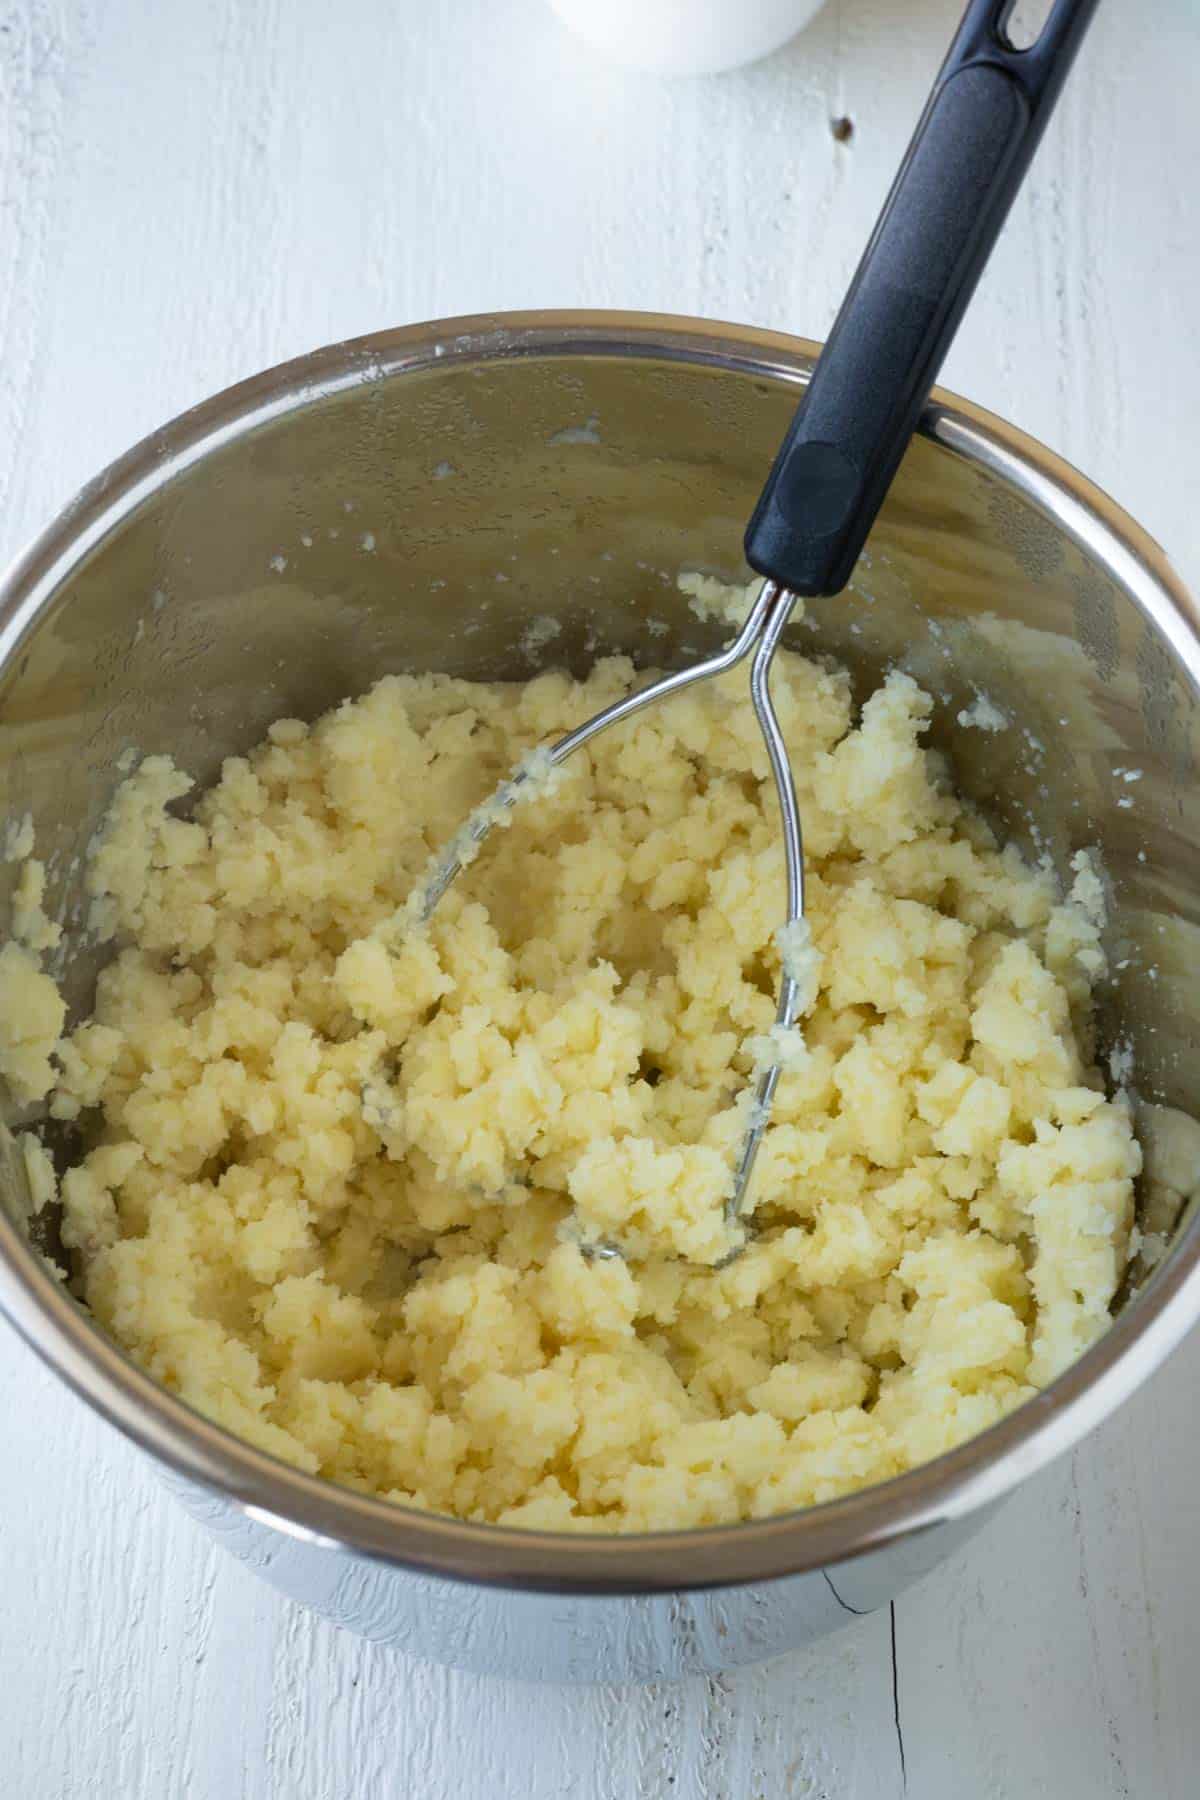 Mashed potatoes with a potato smasher in an instant pot.